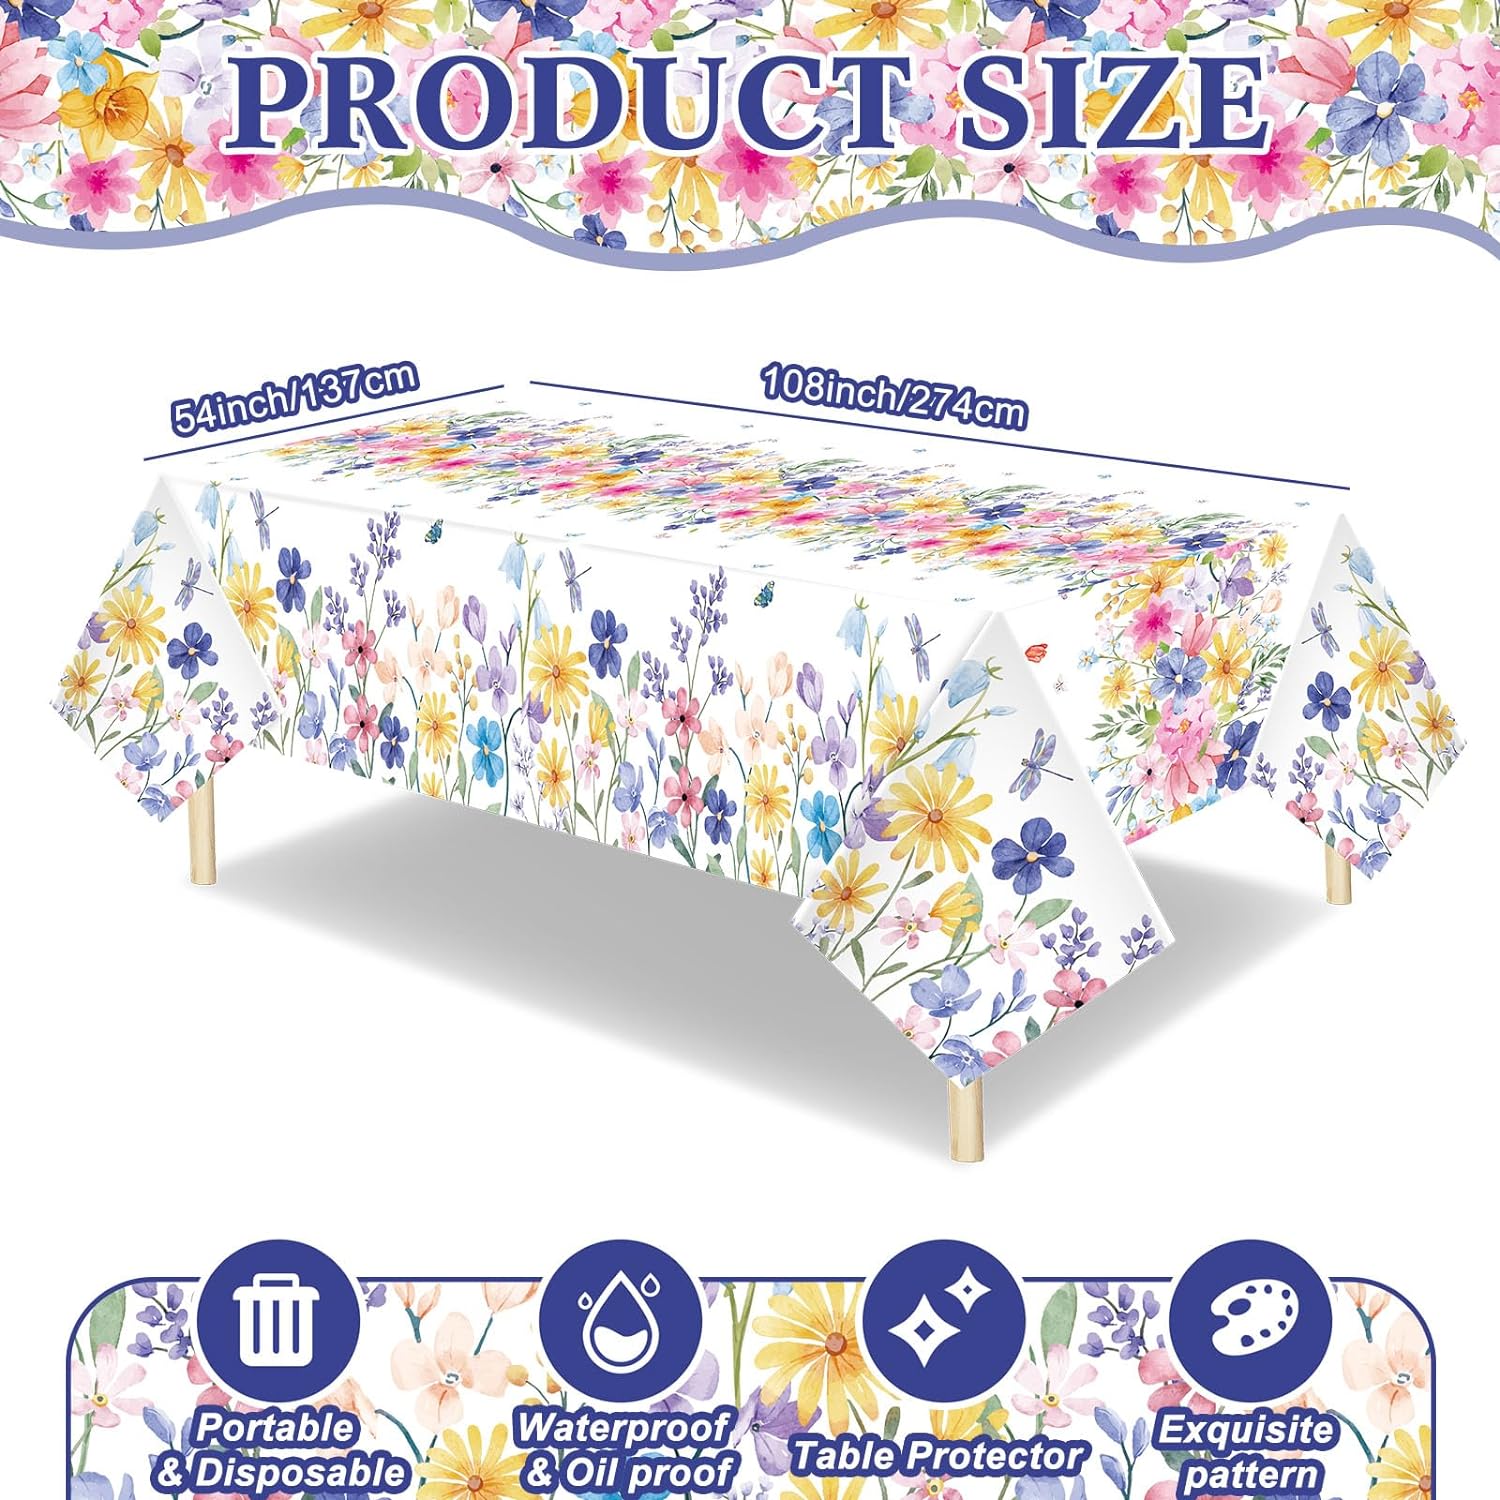 Bulk Vintage Floral Disposable Tablecloth 54 x 108 Inches for Easter Birthdays Baby Showers Spring Summer Events Party Décor Wholesale